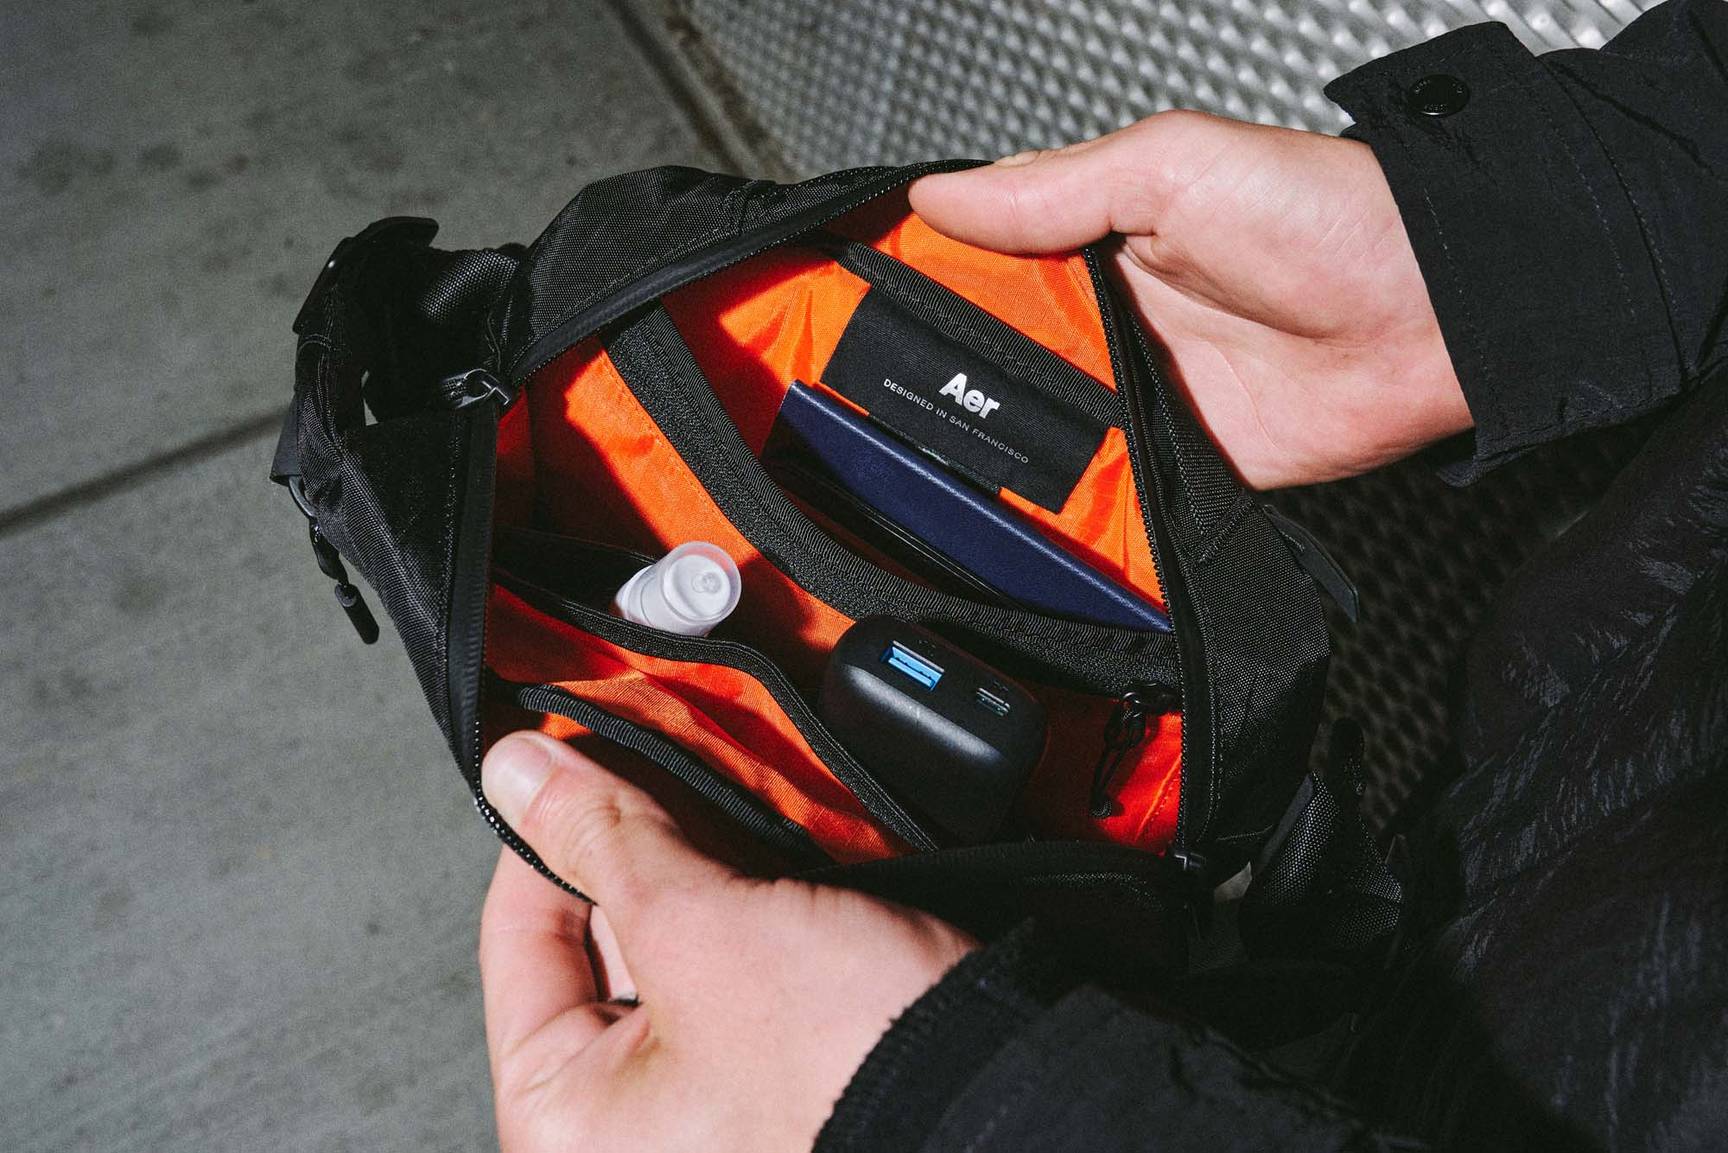 Aer City Sling V2 - practical and compact urban-use EDC sling with